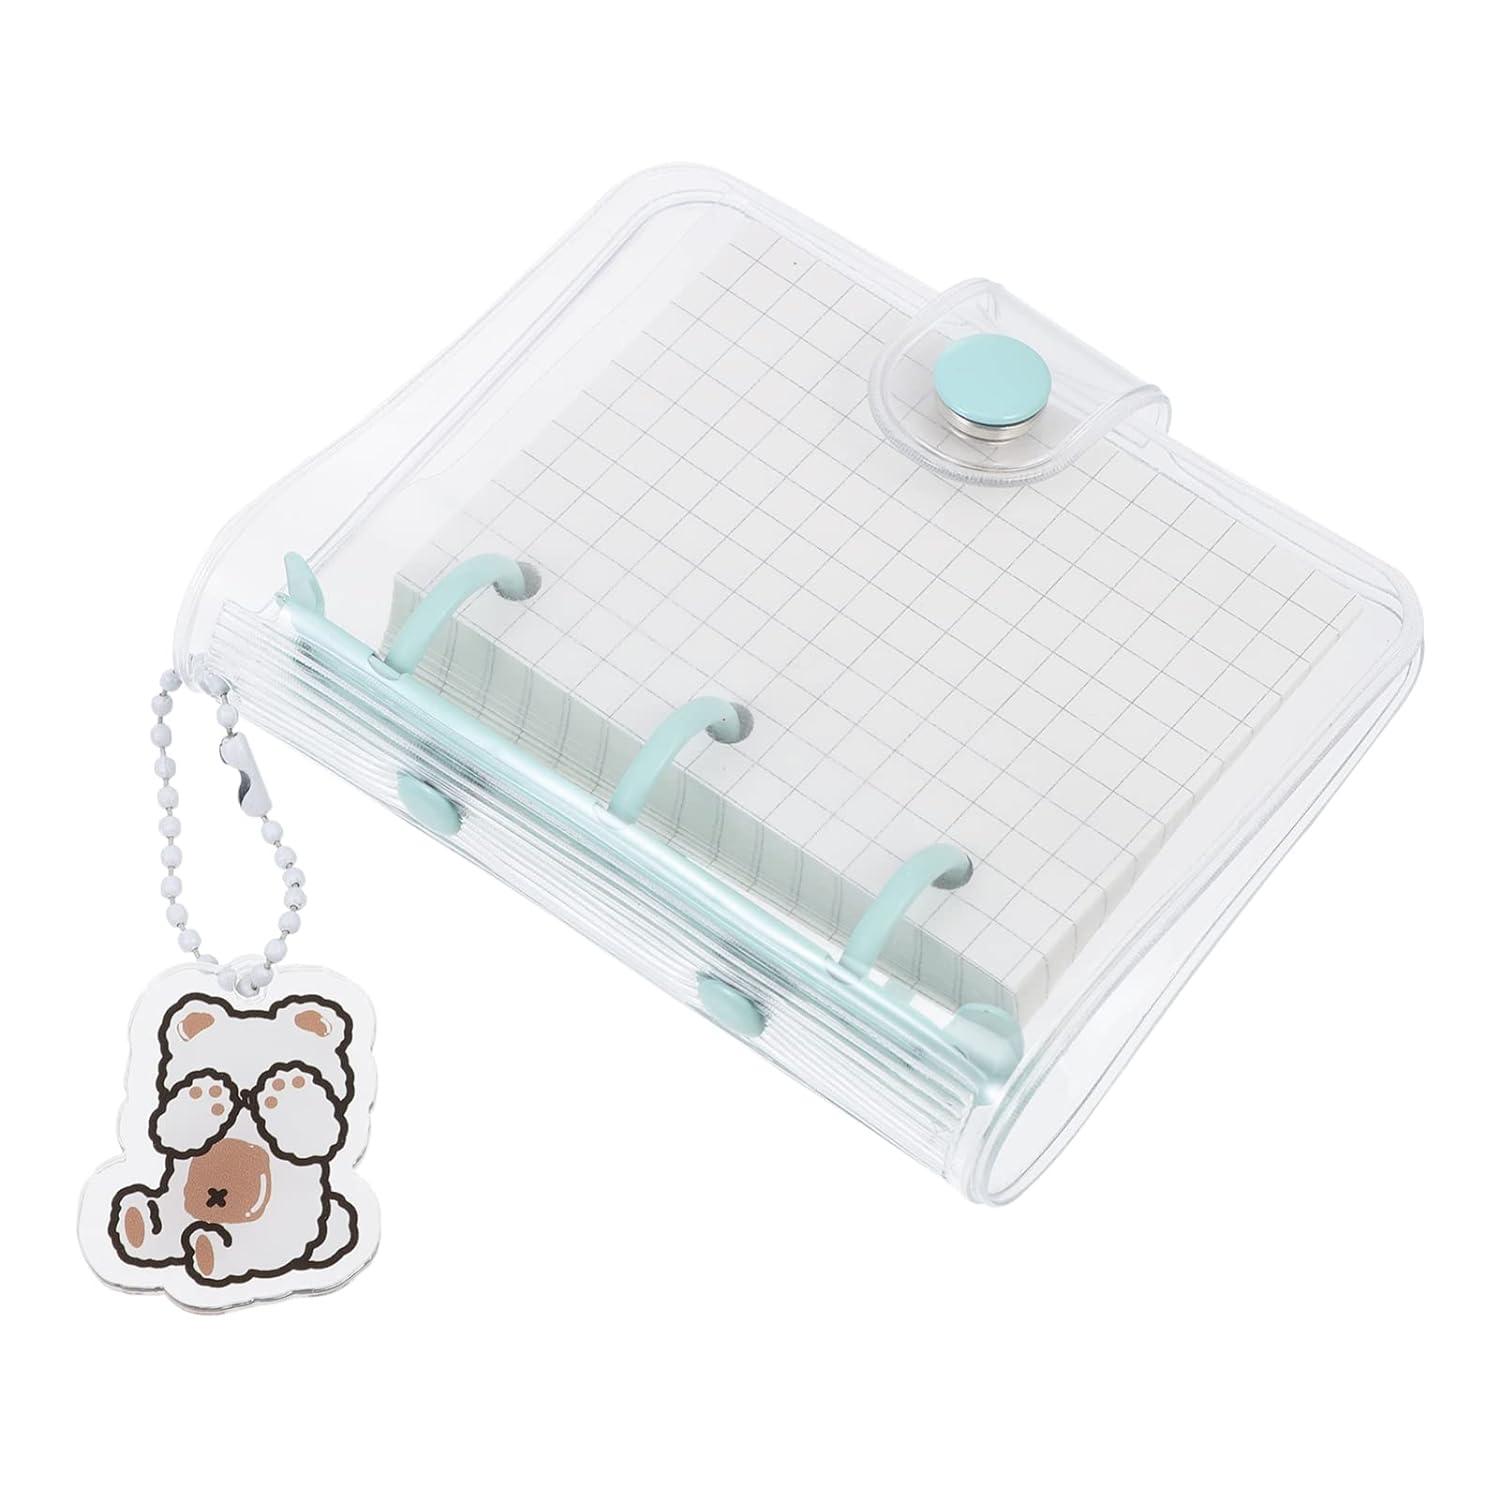 noubesty	mini transparent binder notebook 80 inner paper and bear pendant refillable bags  noubesty b0b6hdyt6v